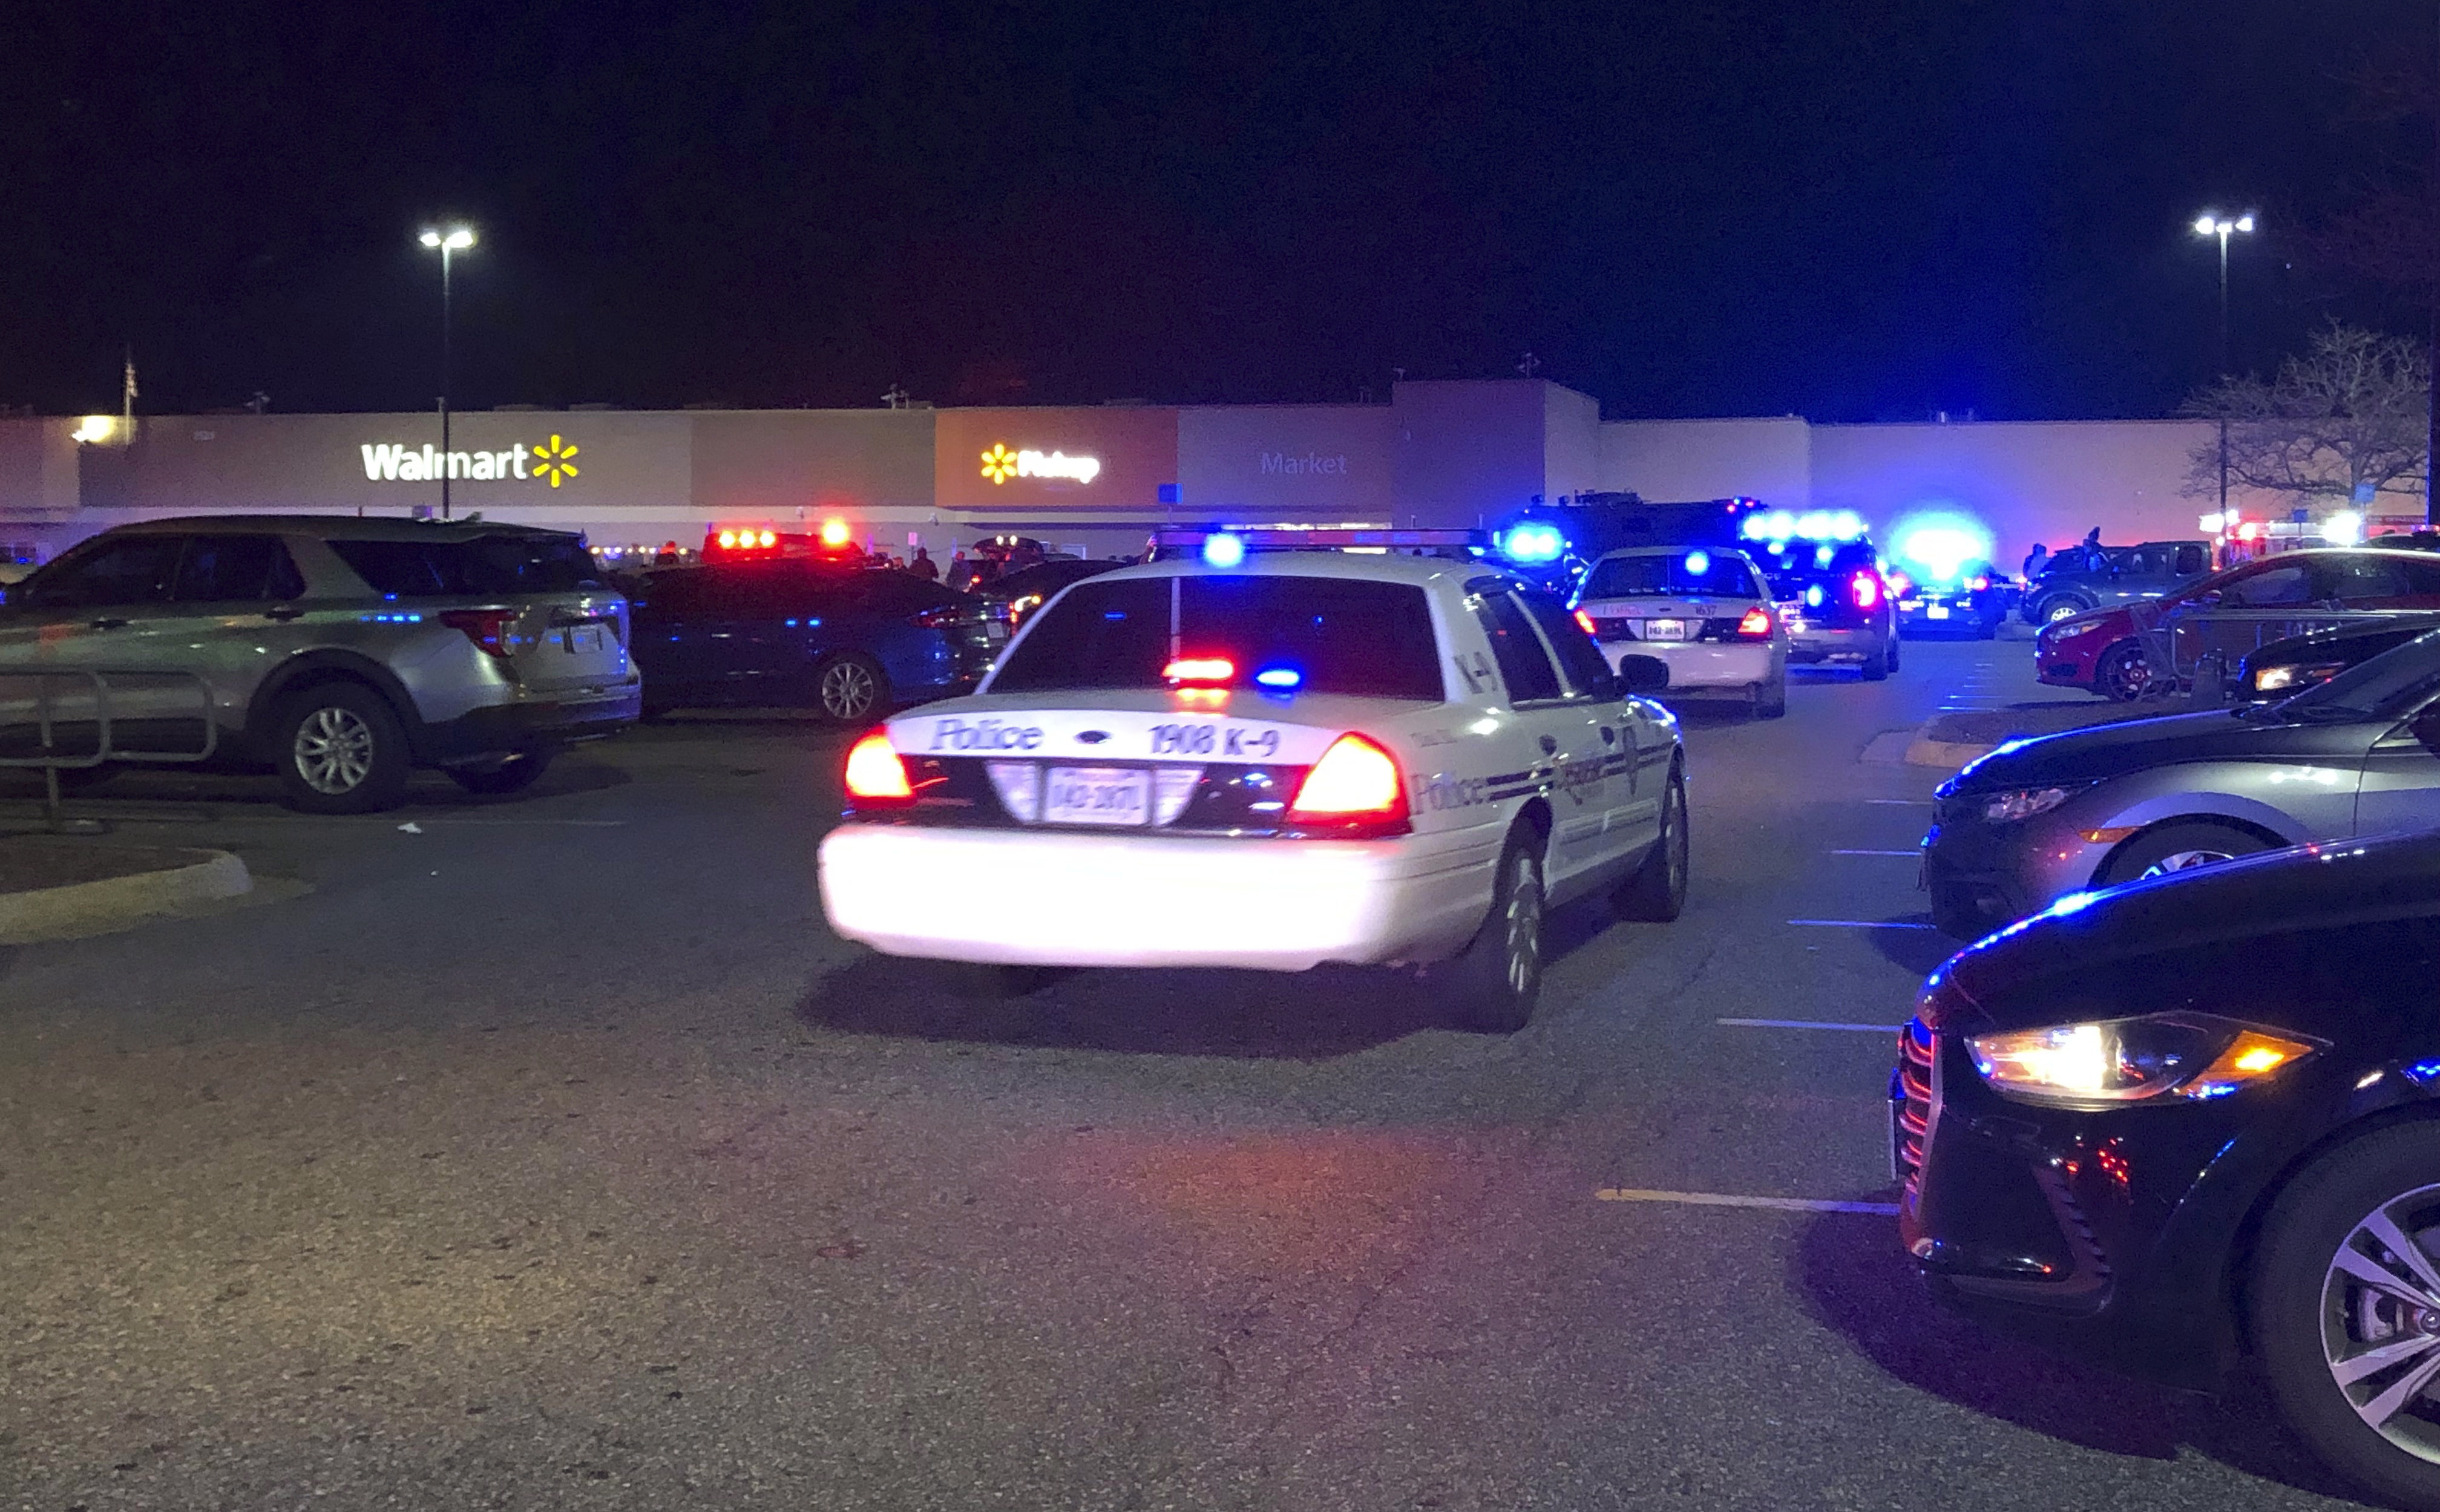 Virginia police at the scene of a fatal shooting at a Walmart in Chesapeake on November 22. Photo: WAVY-TV 10 via AP